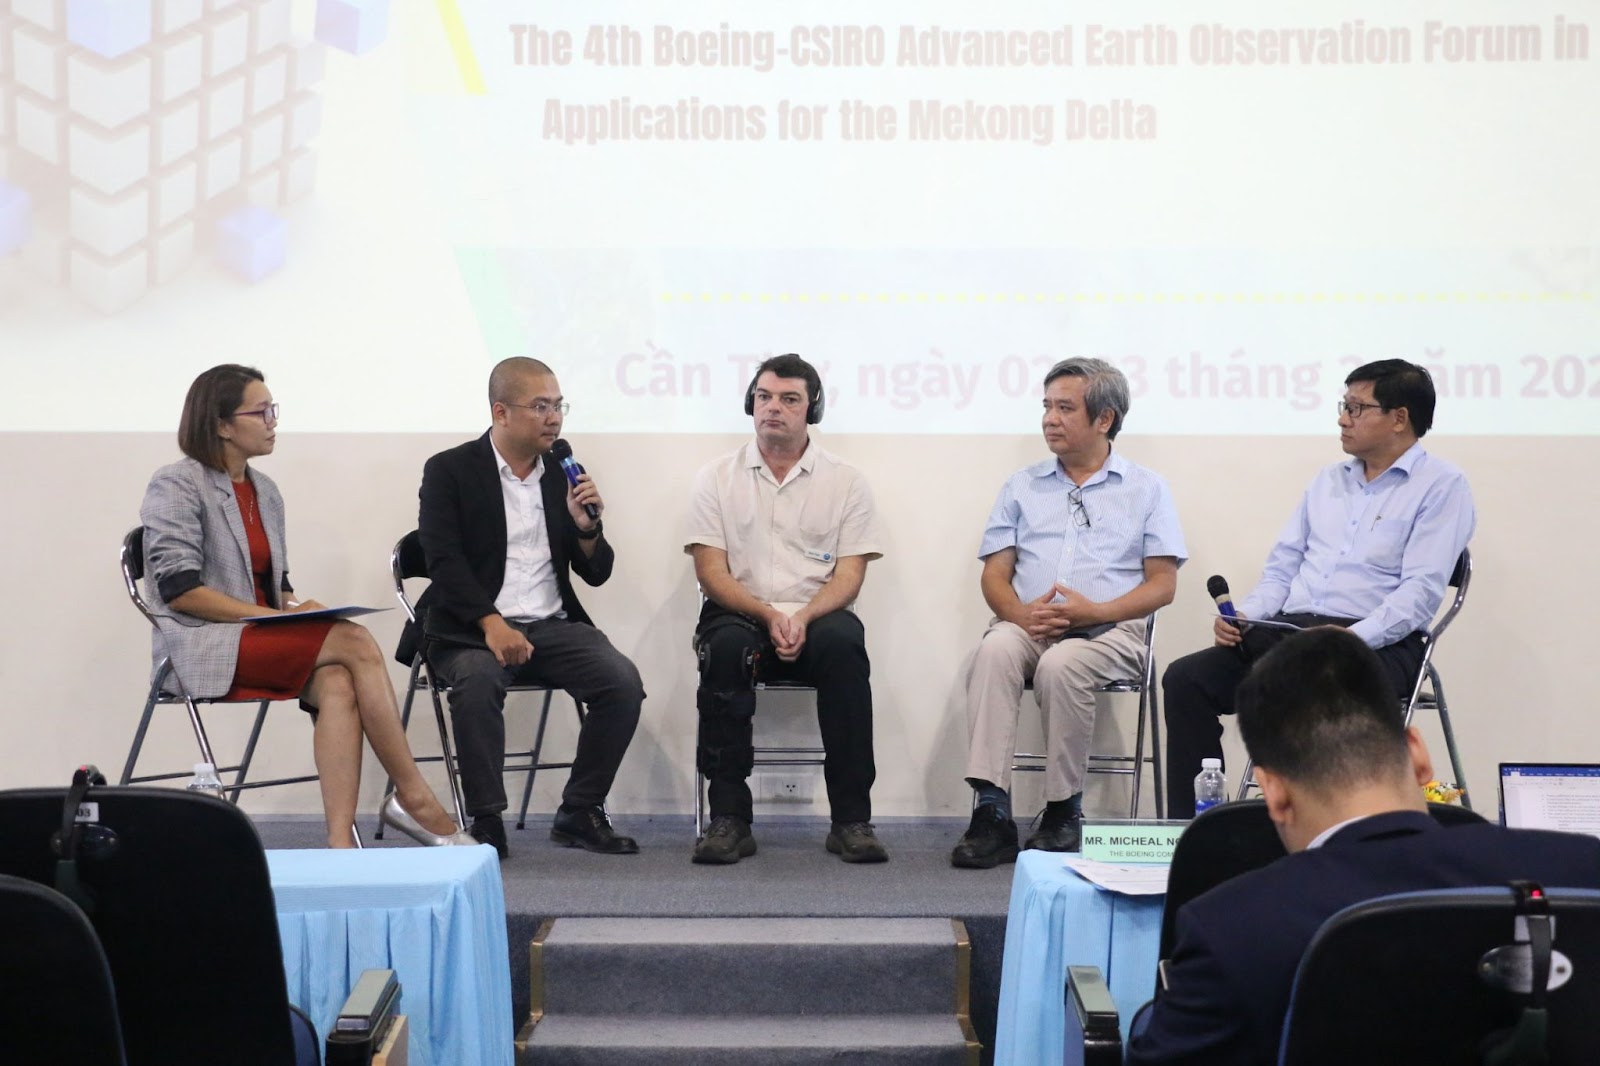 The 4th Boeing-CSIRO Advanced Earth Observation Forum in Vietnam: Applications for the Mekong Delta